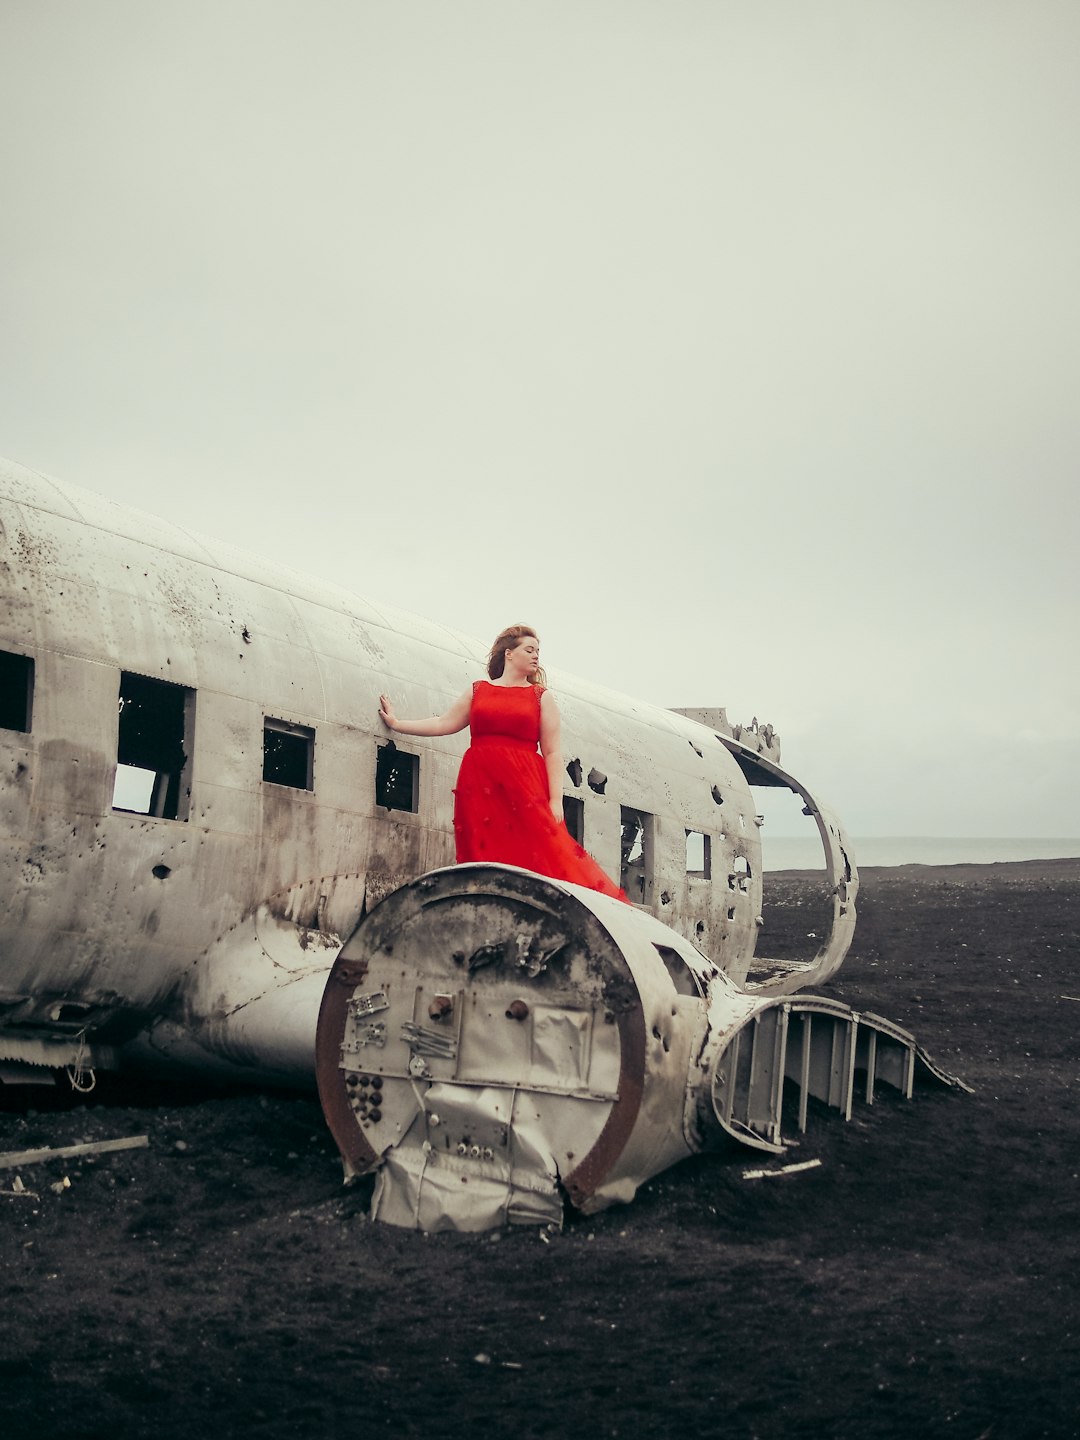 A model wearing red on the iconic crashed plane in Iceland, shot on a vintage slr and edited to look like film.